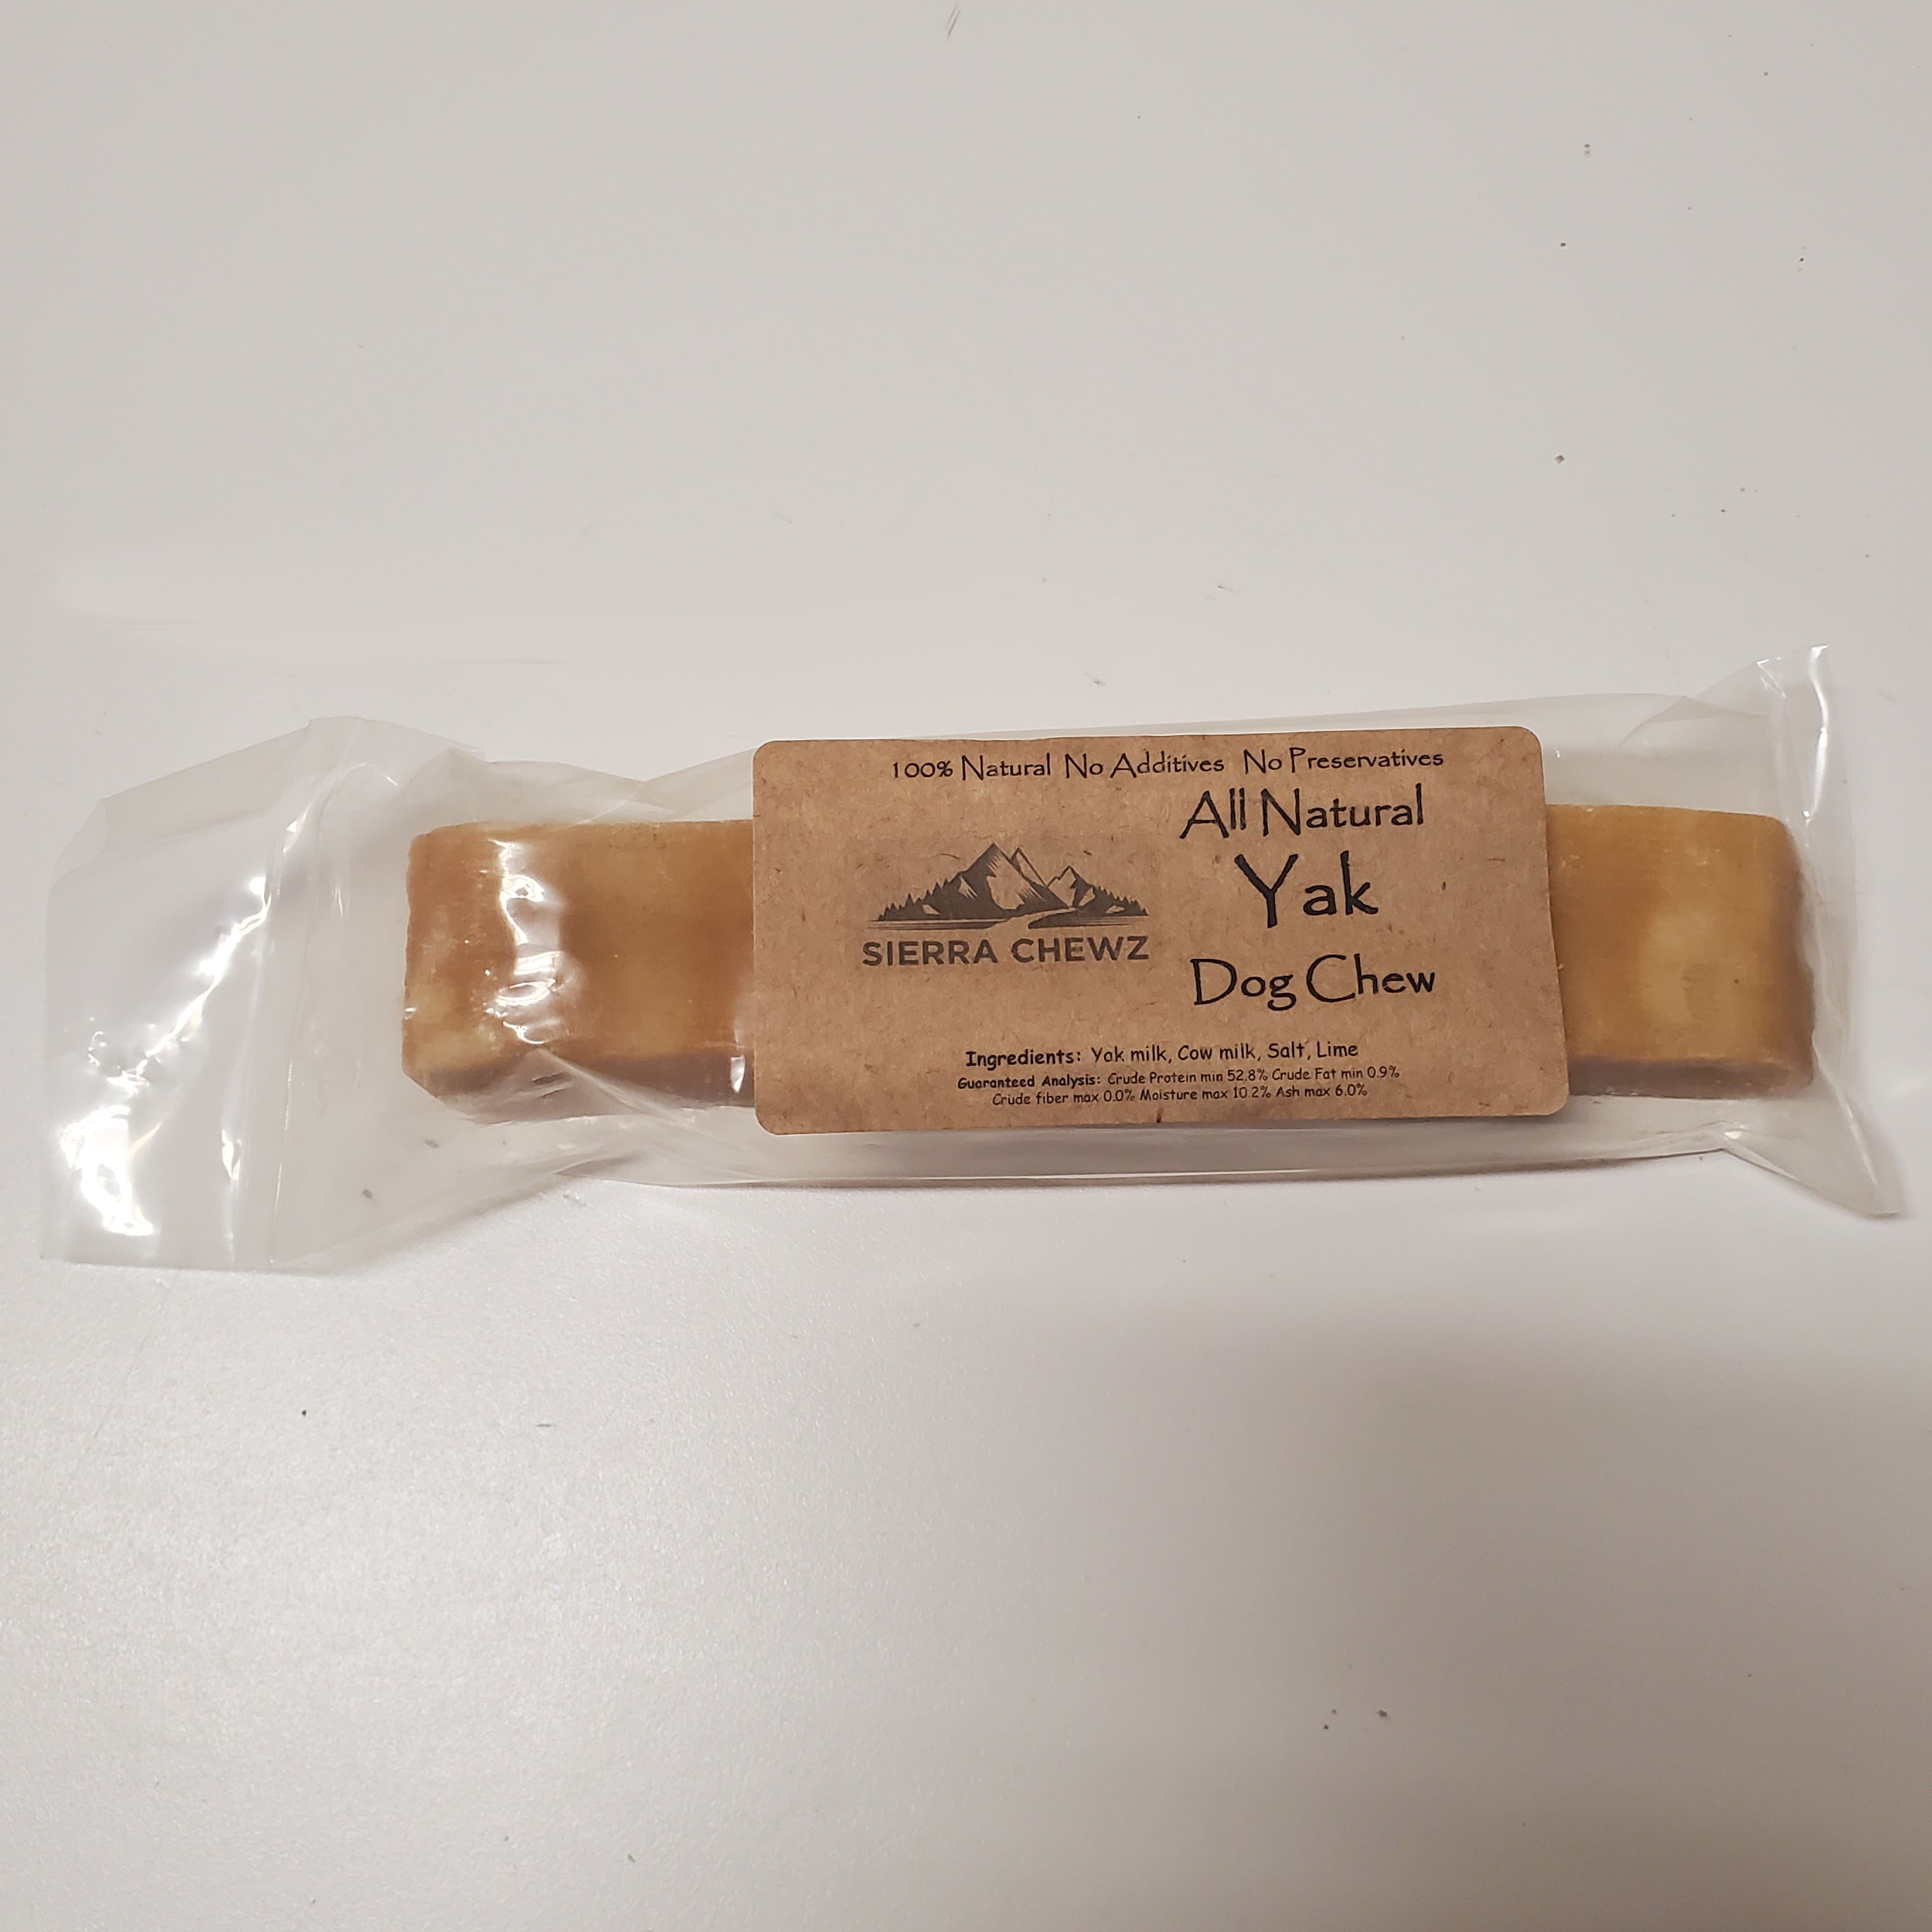 Sierra Chewz All Natural Yak Chew For Dogs